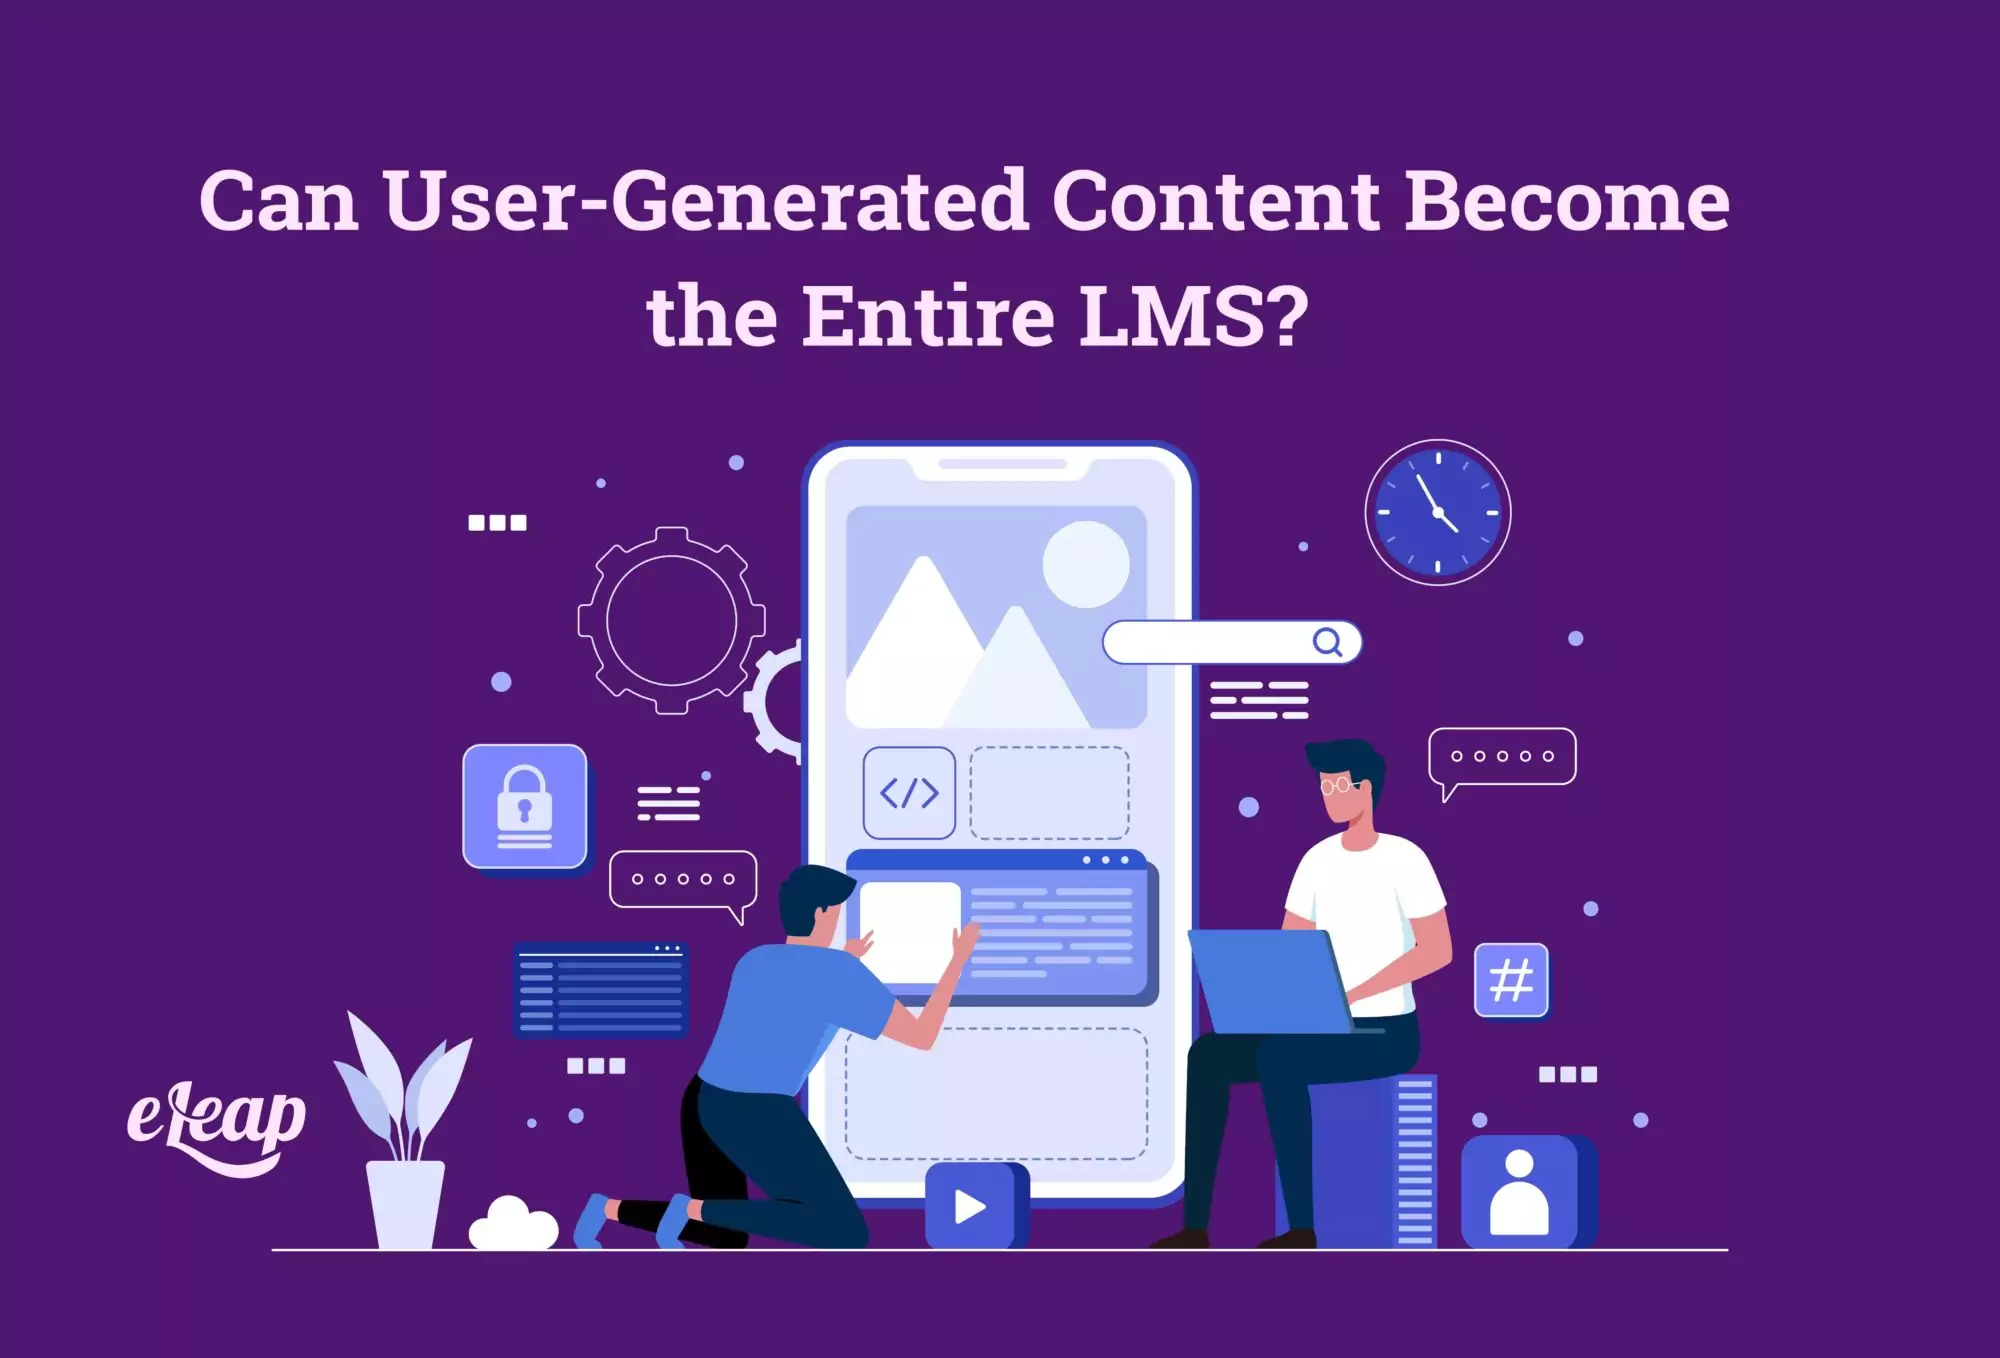 Can User-Generated Content Become the Entire LMS?